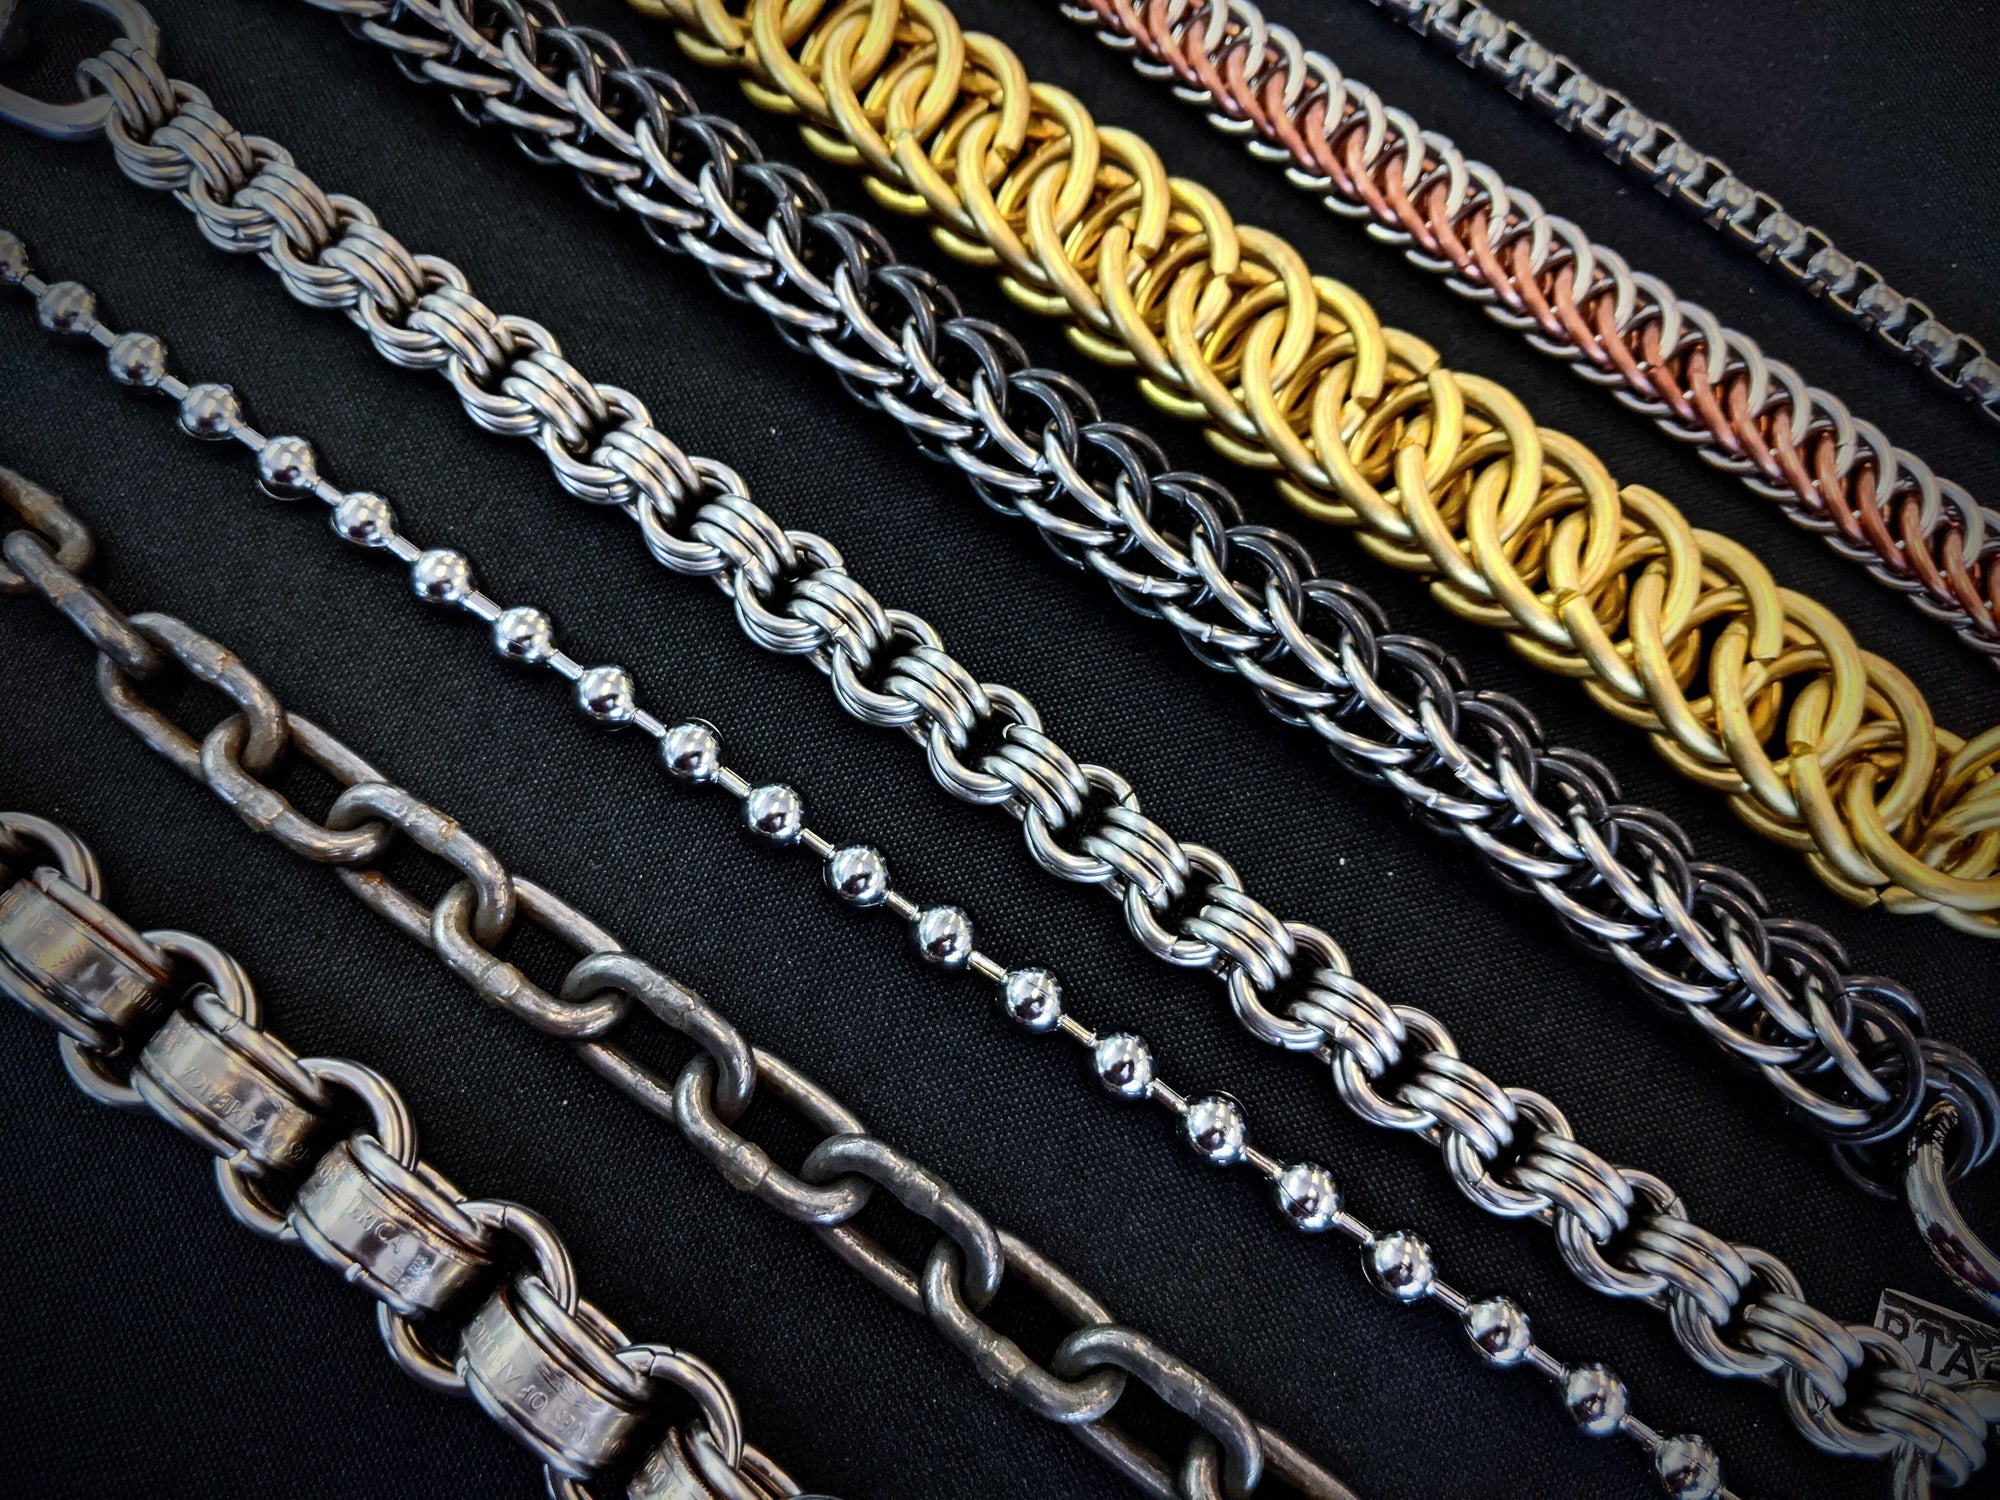 The Anvil Wallet Chain | Product Breakdown